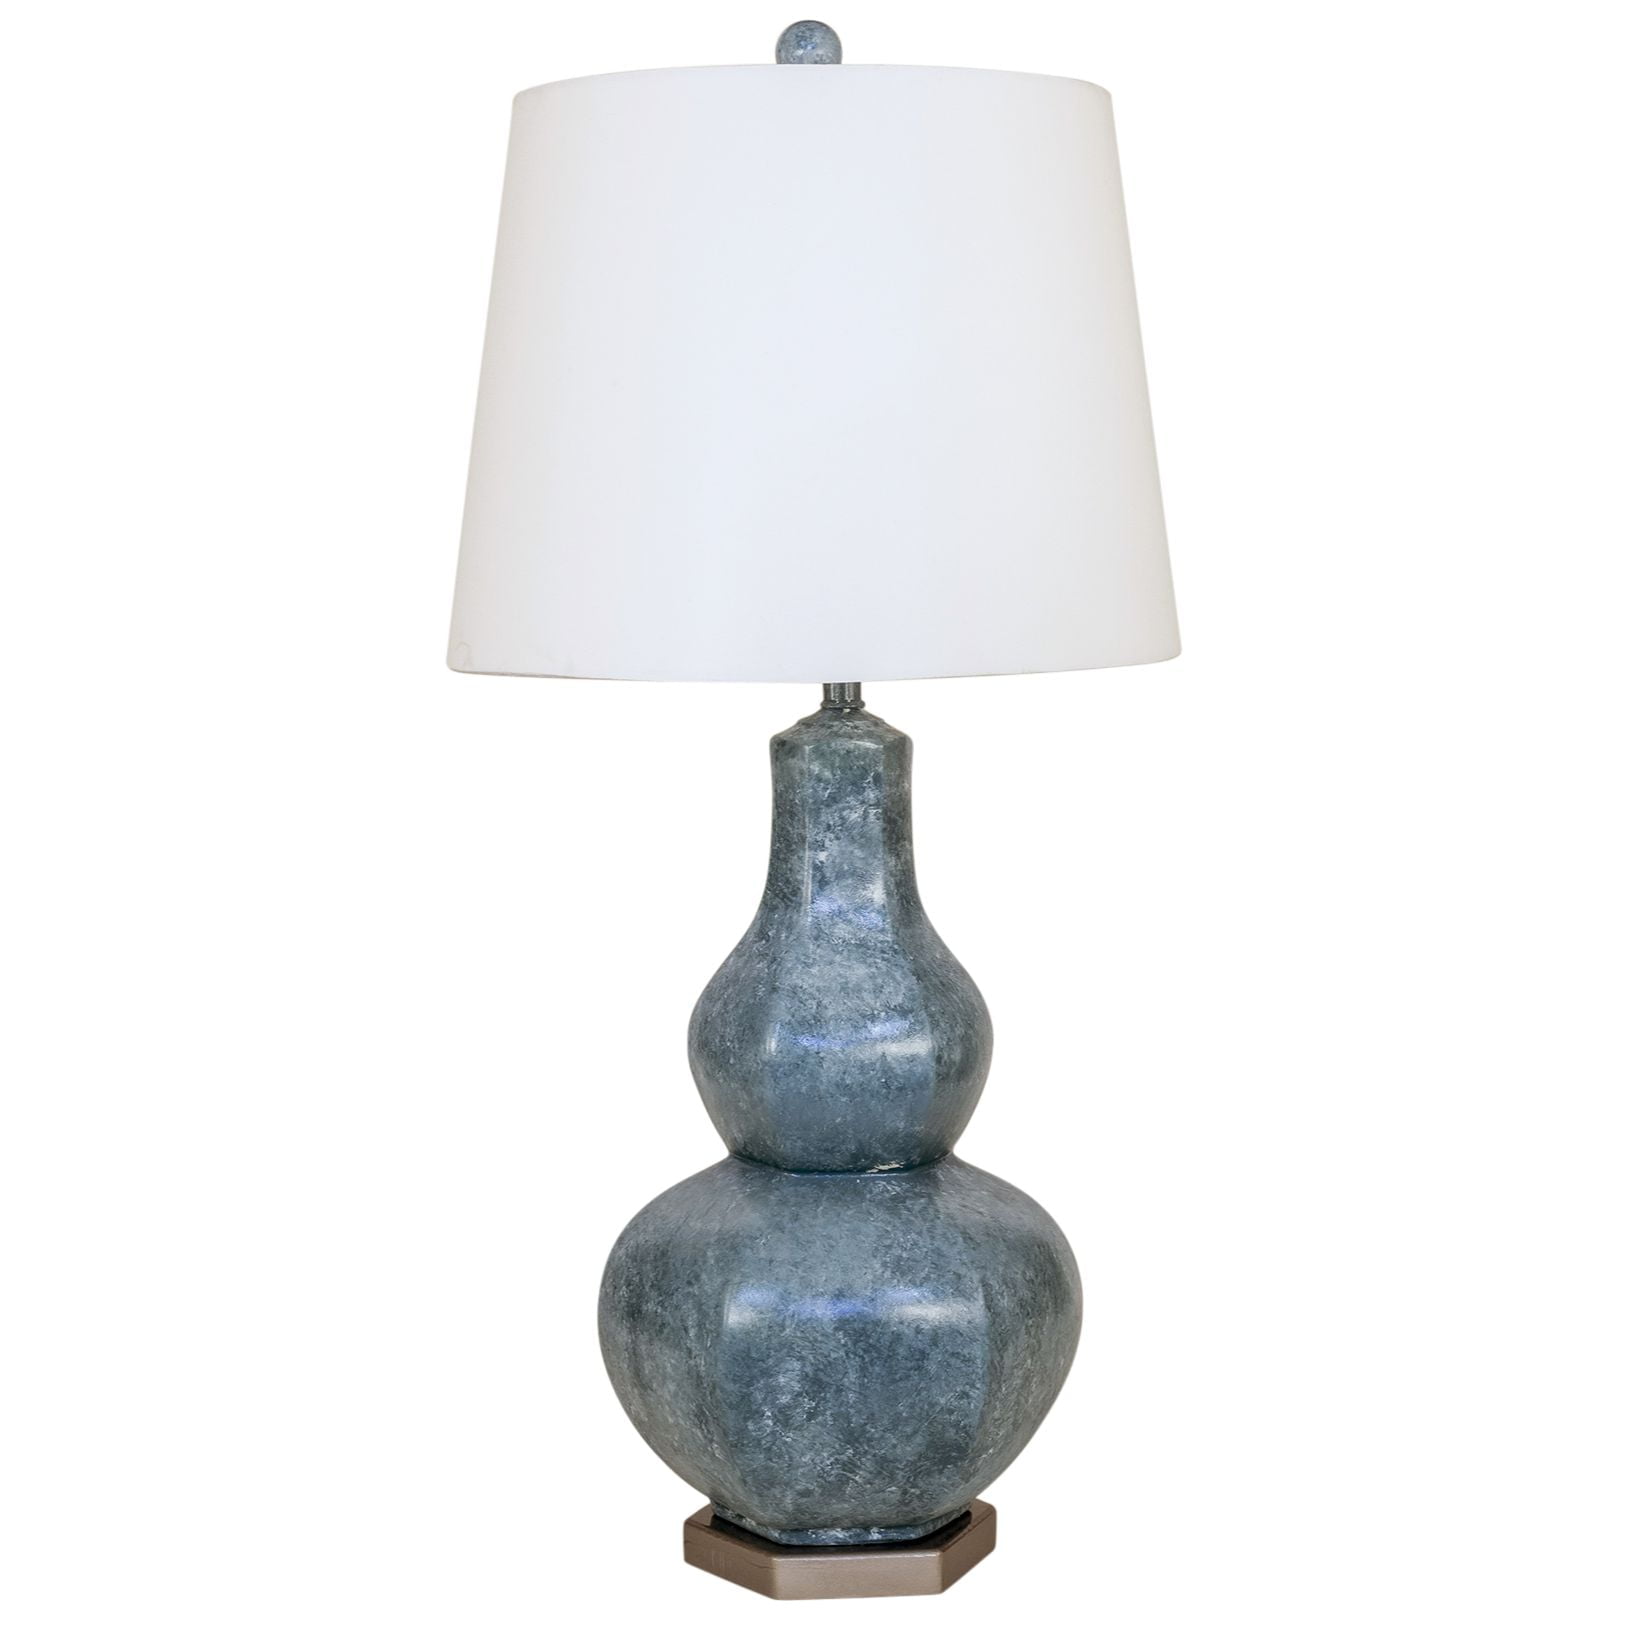 6-Sided Teardrop Table Lamp with Base